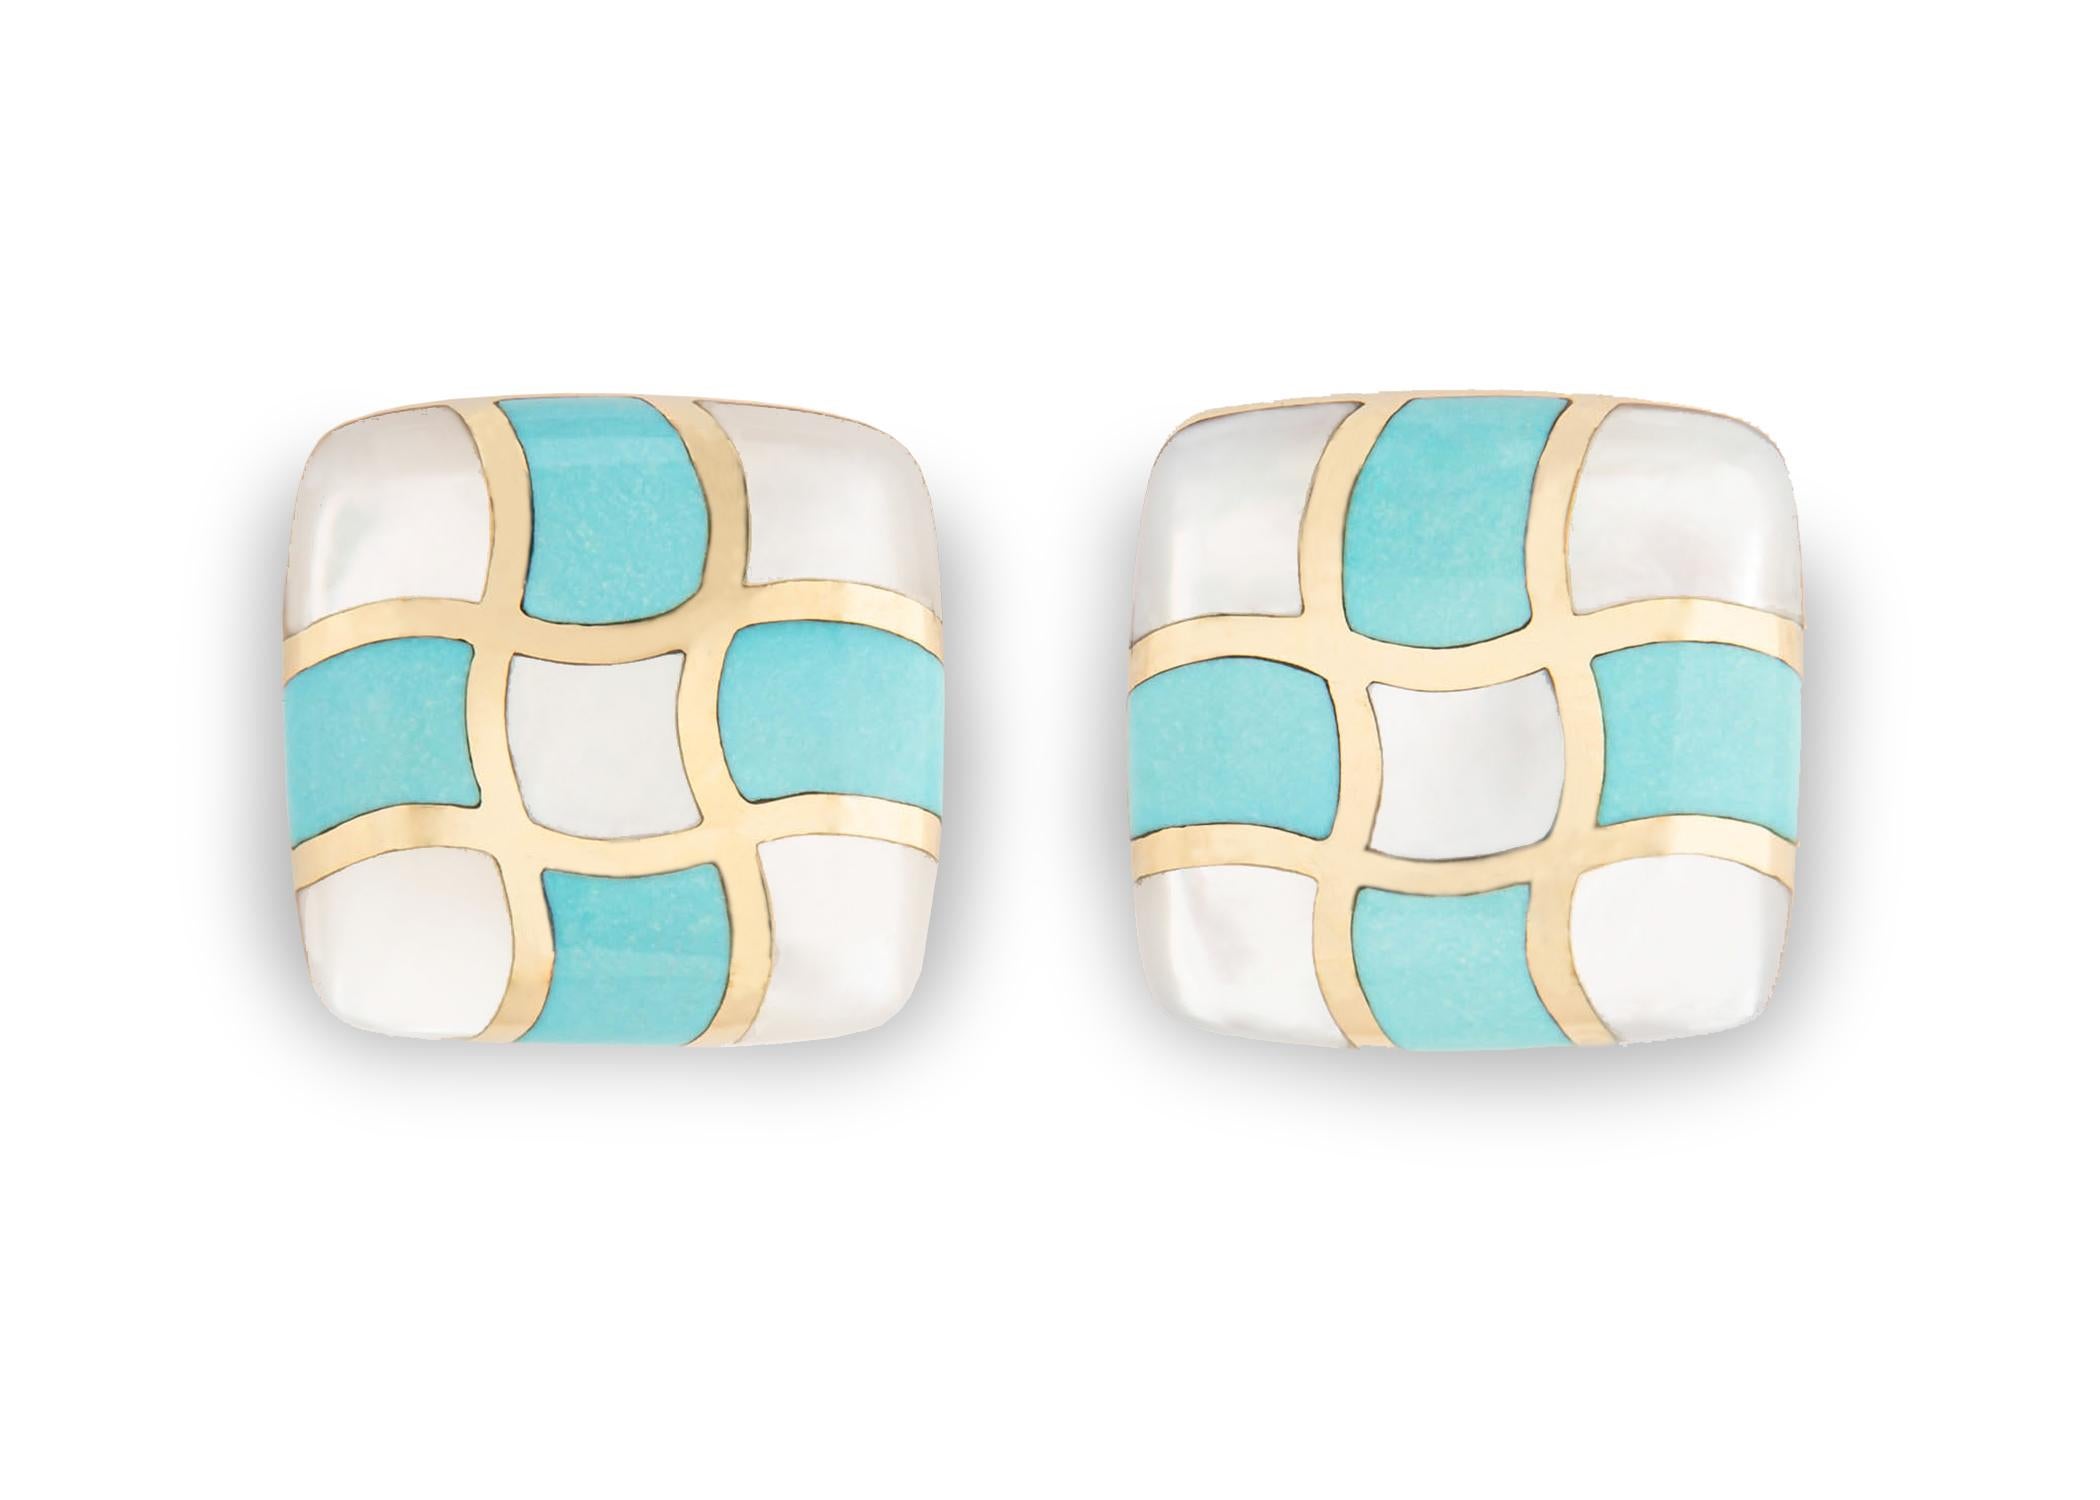 Asch Grossbardt combines rich turquoise and bright mother of pearl in a simple checkerboard pattern to create this chic easy to wear earring. Approximately 7/8's of an inch in size.